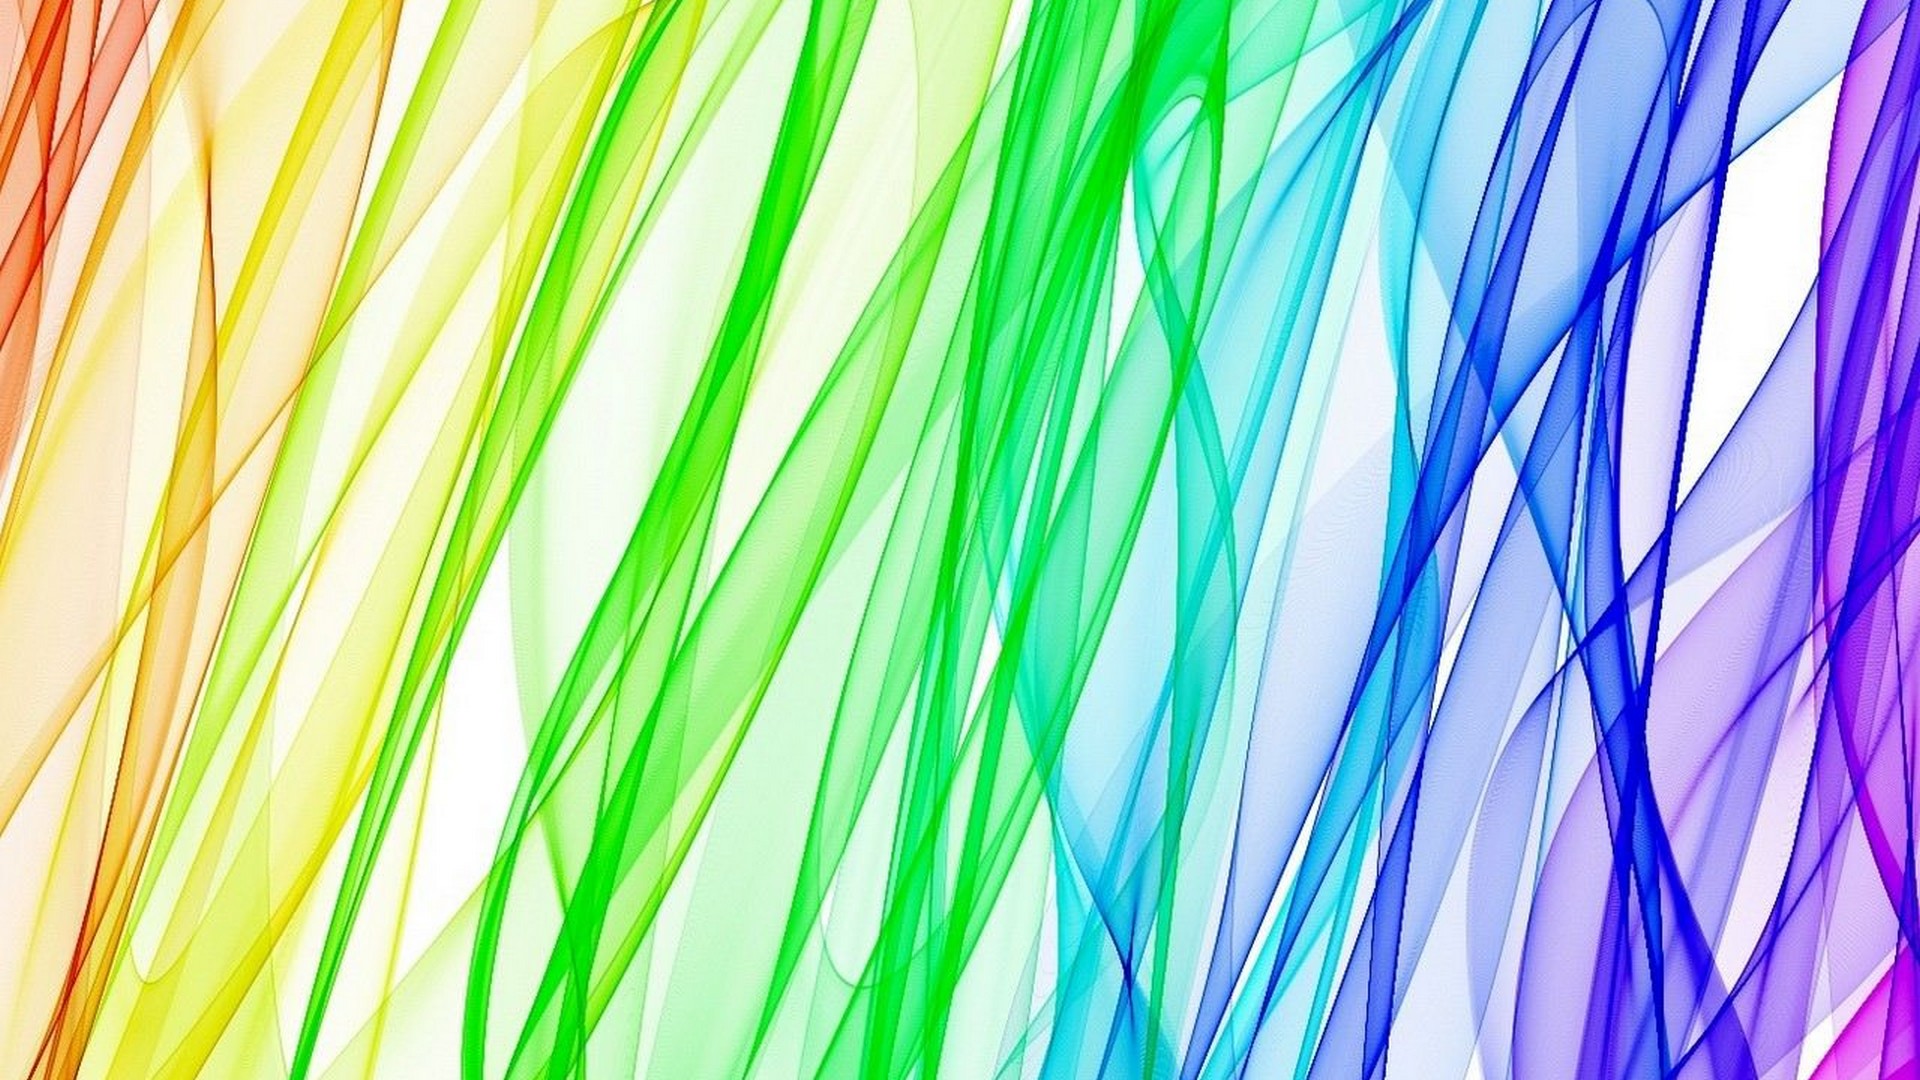 Rainbow Colors HD Wallpaper with image resolution 1920x1080 pixel. You can make this wallpaper for your Desktop Computer Backgrounds, Mac Wallpapers, Android Lock screen or iPhone Screensavers